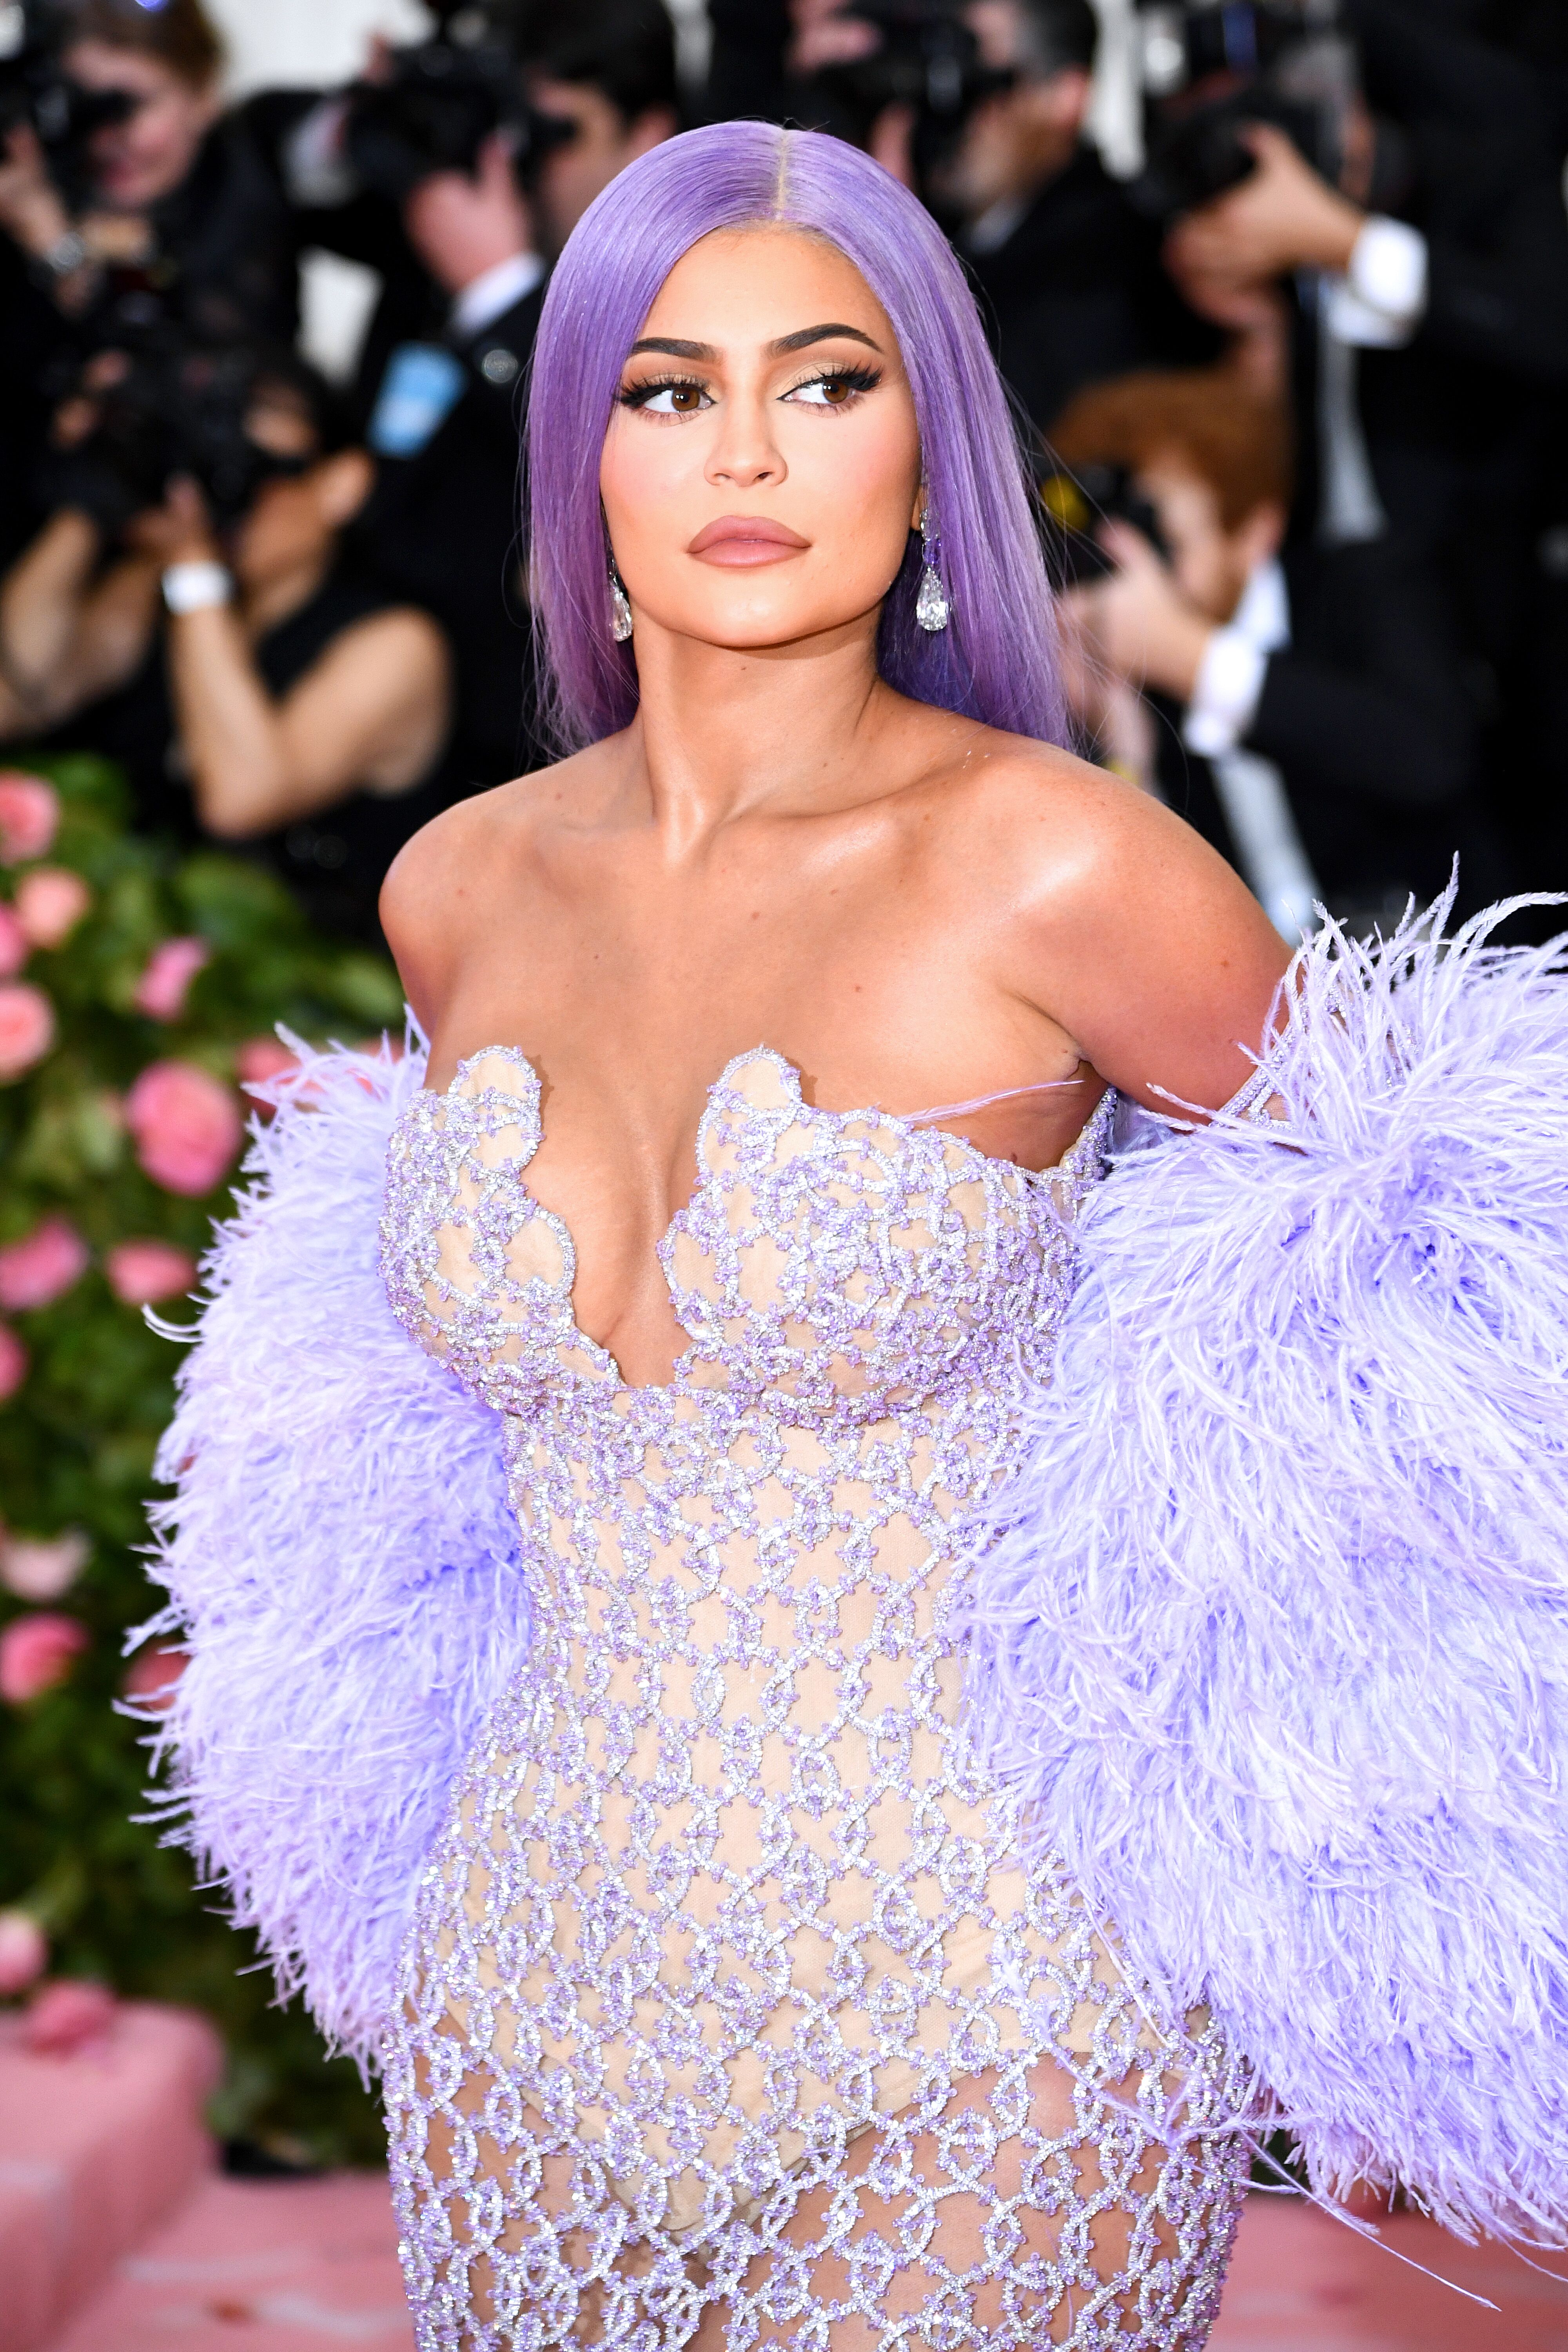 Kylie Jenner at the MET Gala/ Source: Getty Images